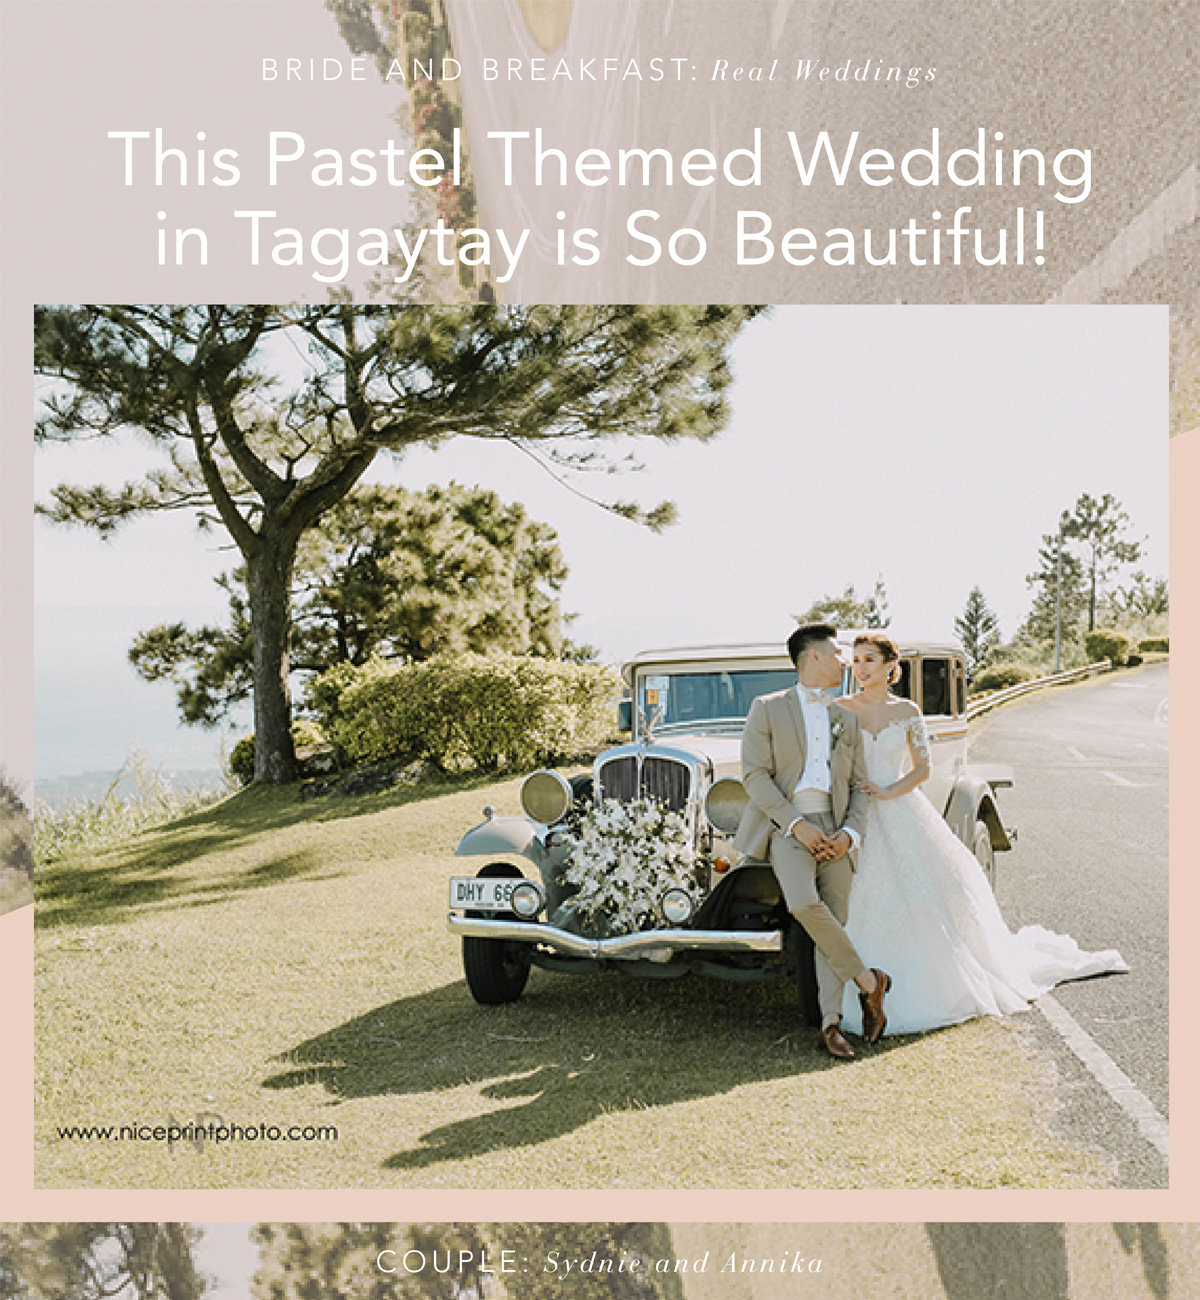 This Pastel Themed Wedding in Tagaytay is So Beautiful!